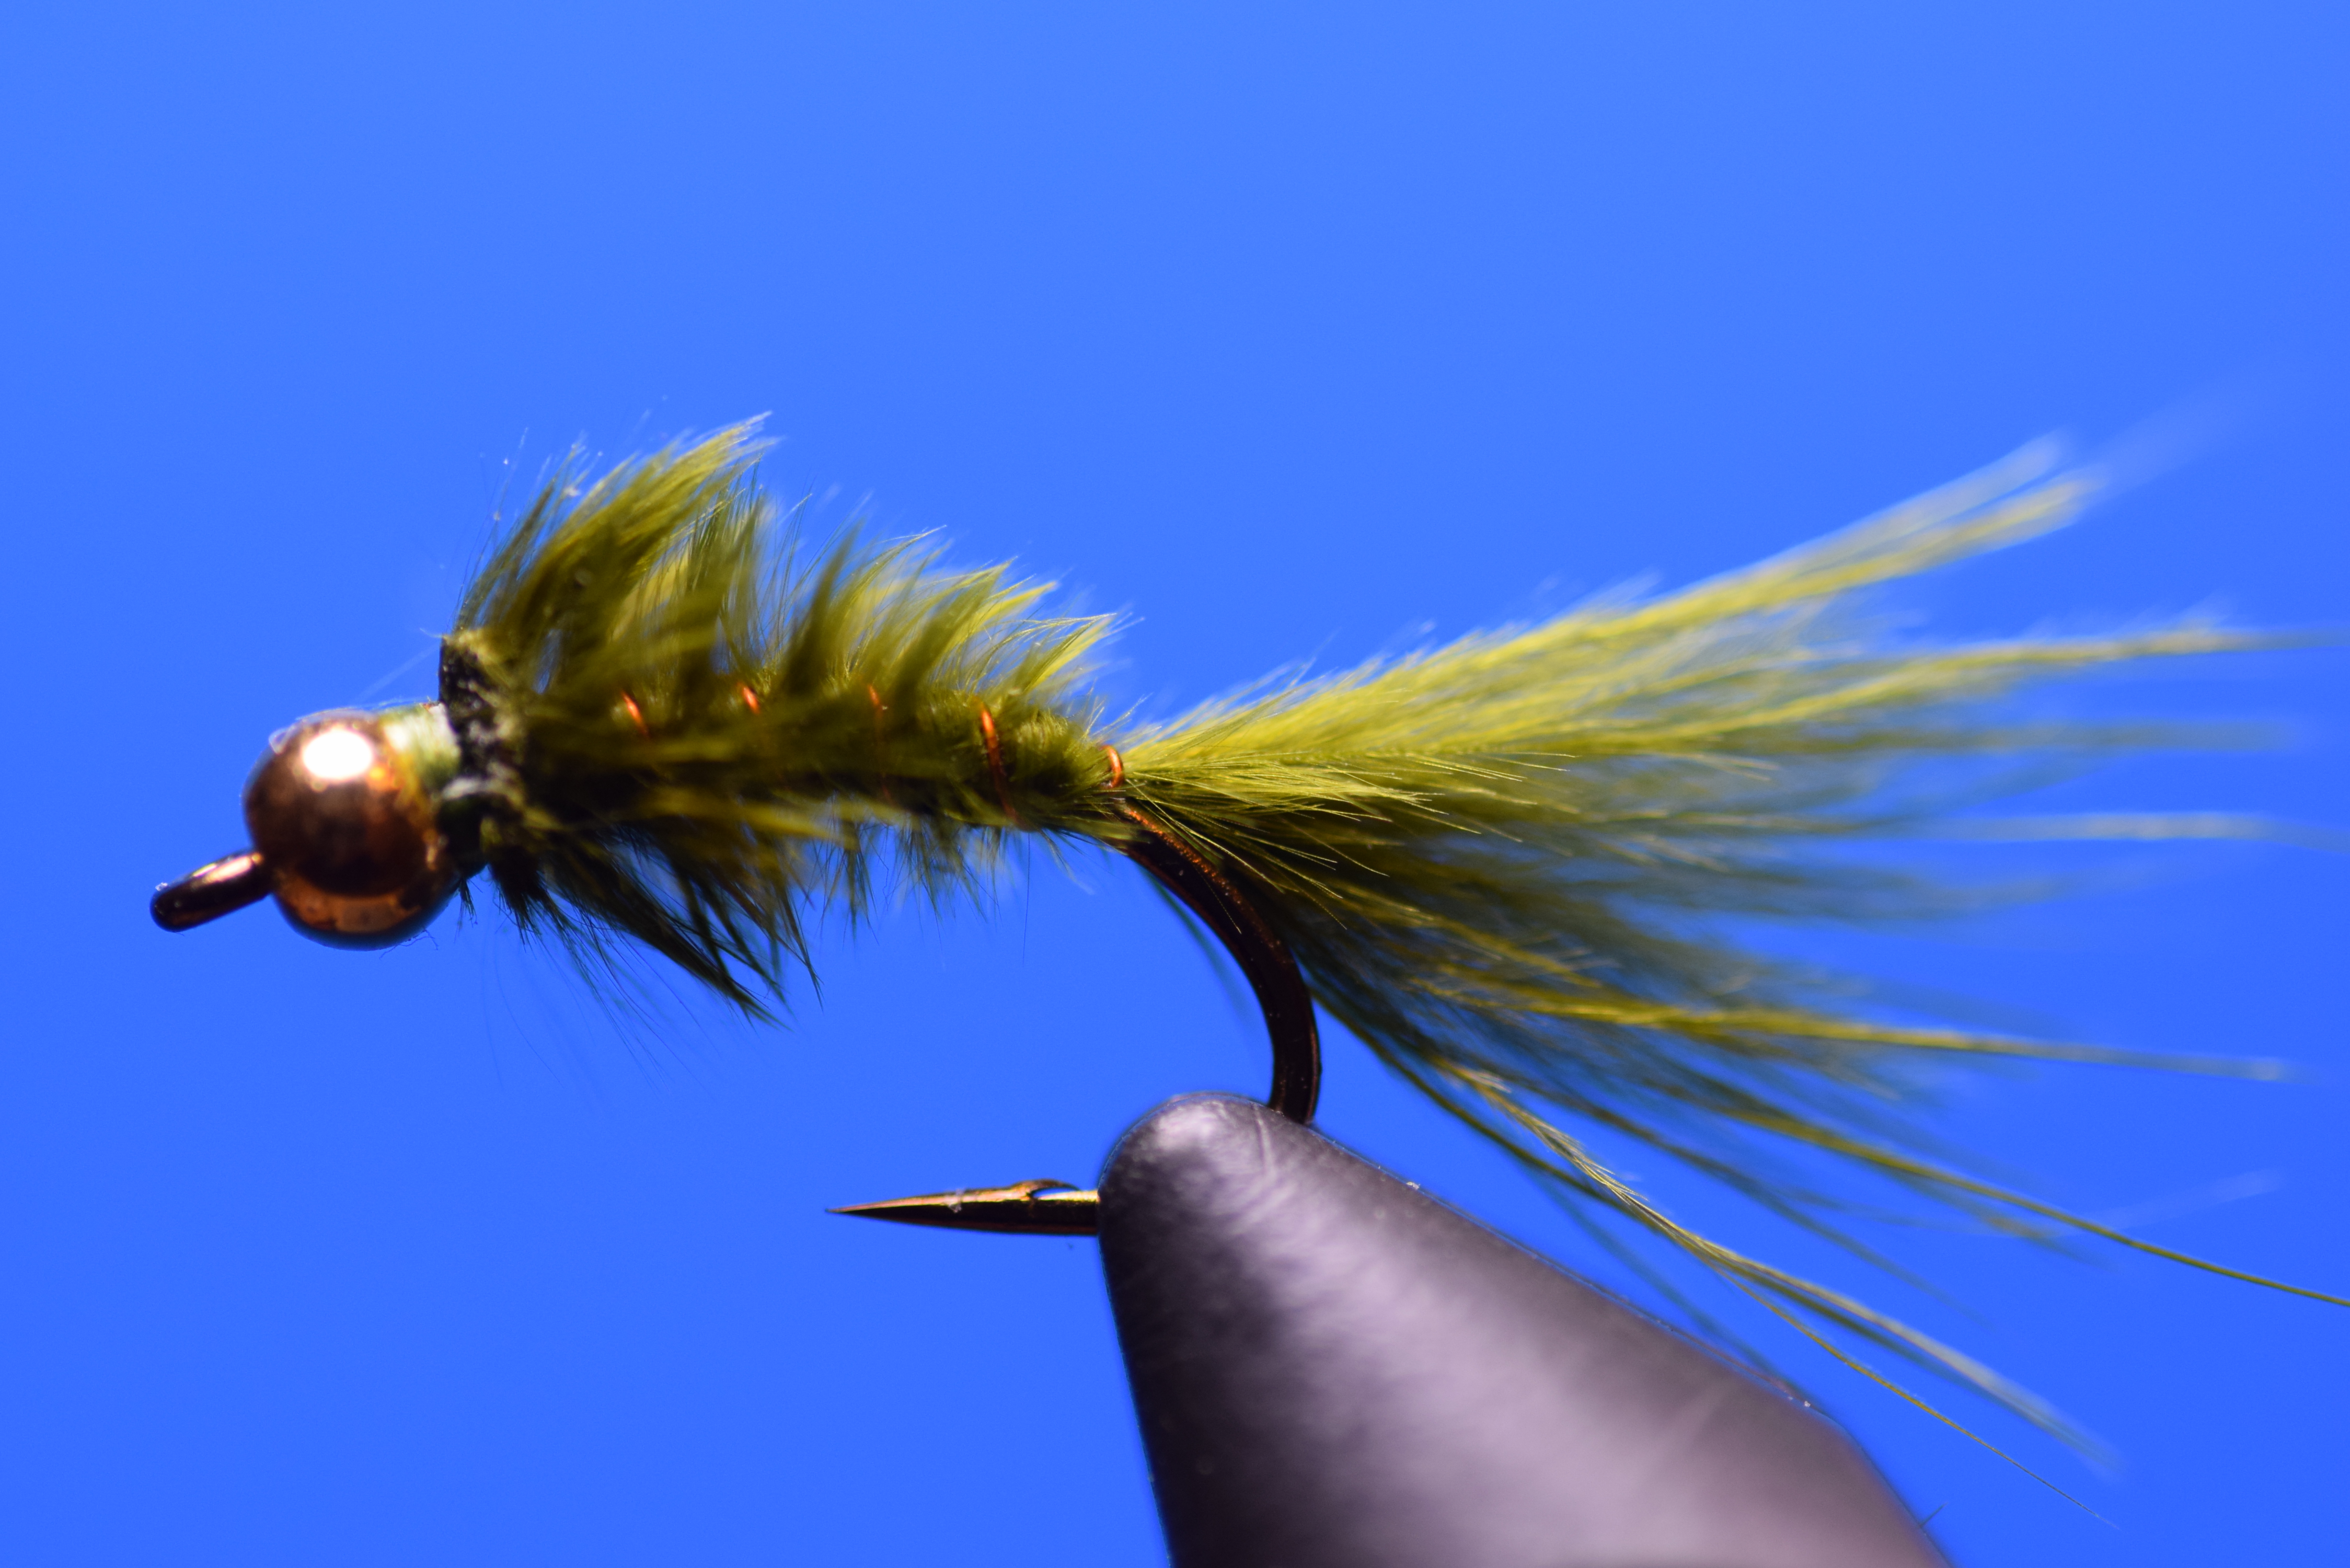 Small nymphs,  The North American Fly Fishing Forum - sponsored